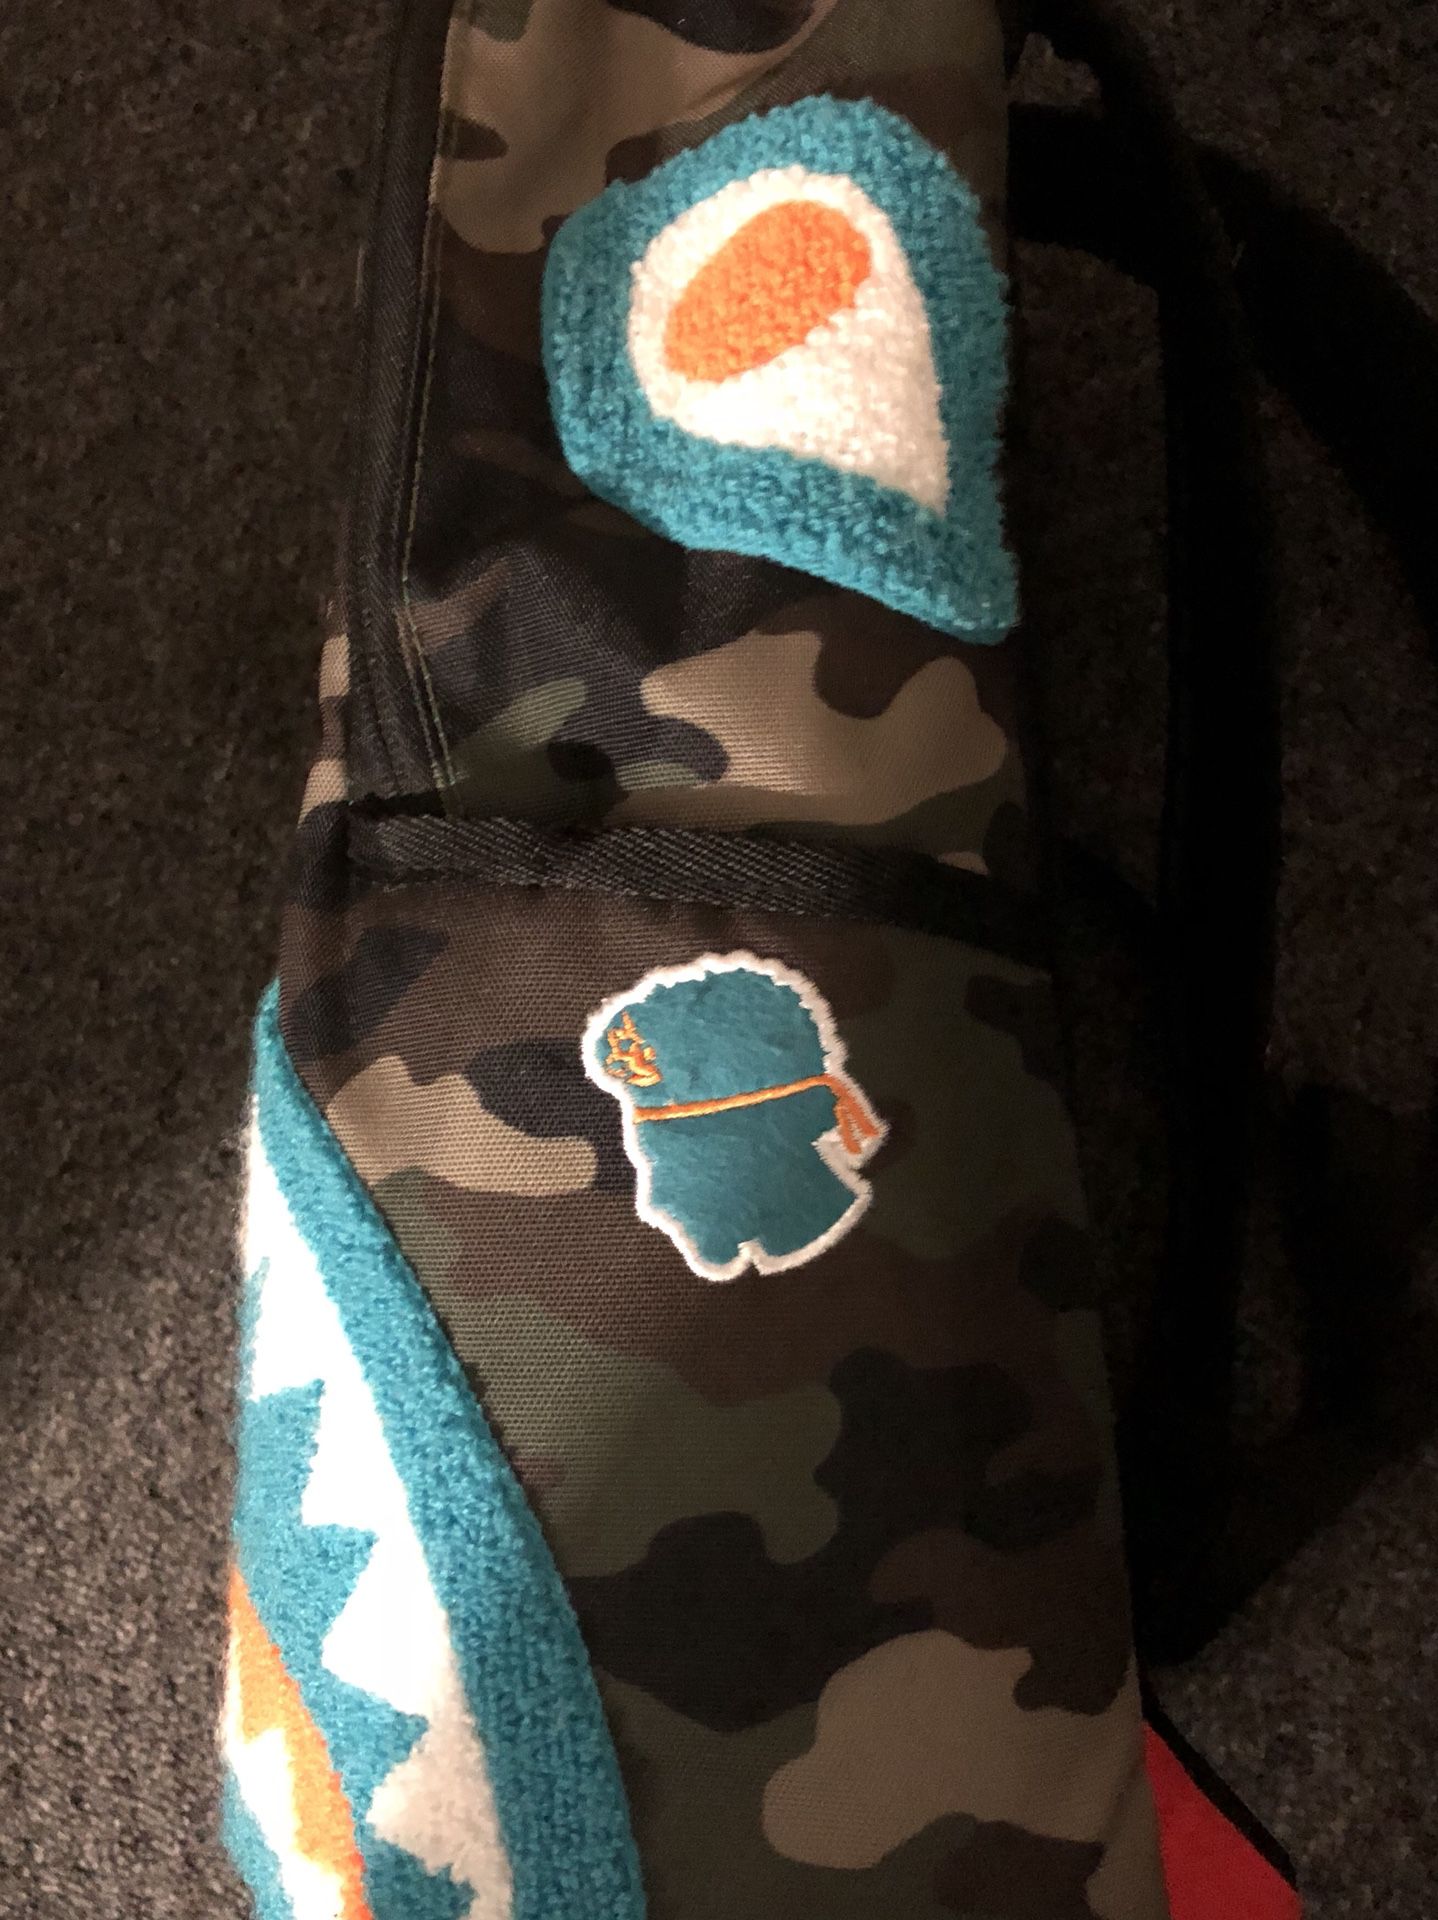 Jarvis Landry Juice Sprayground Backpack for Sale in Columbus, OH - OfferUp